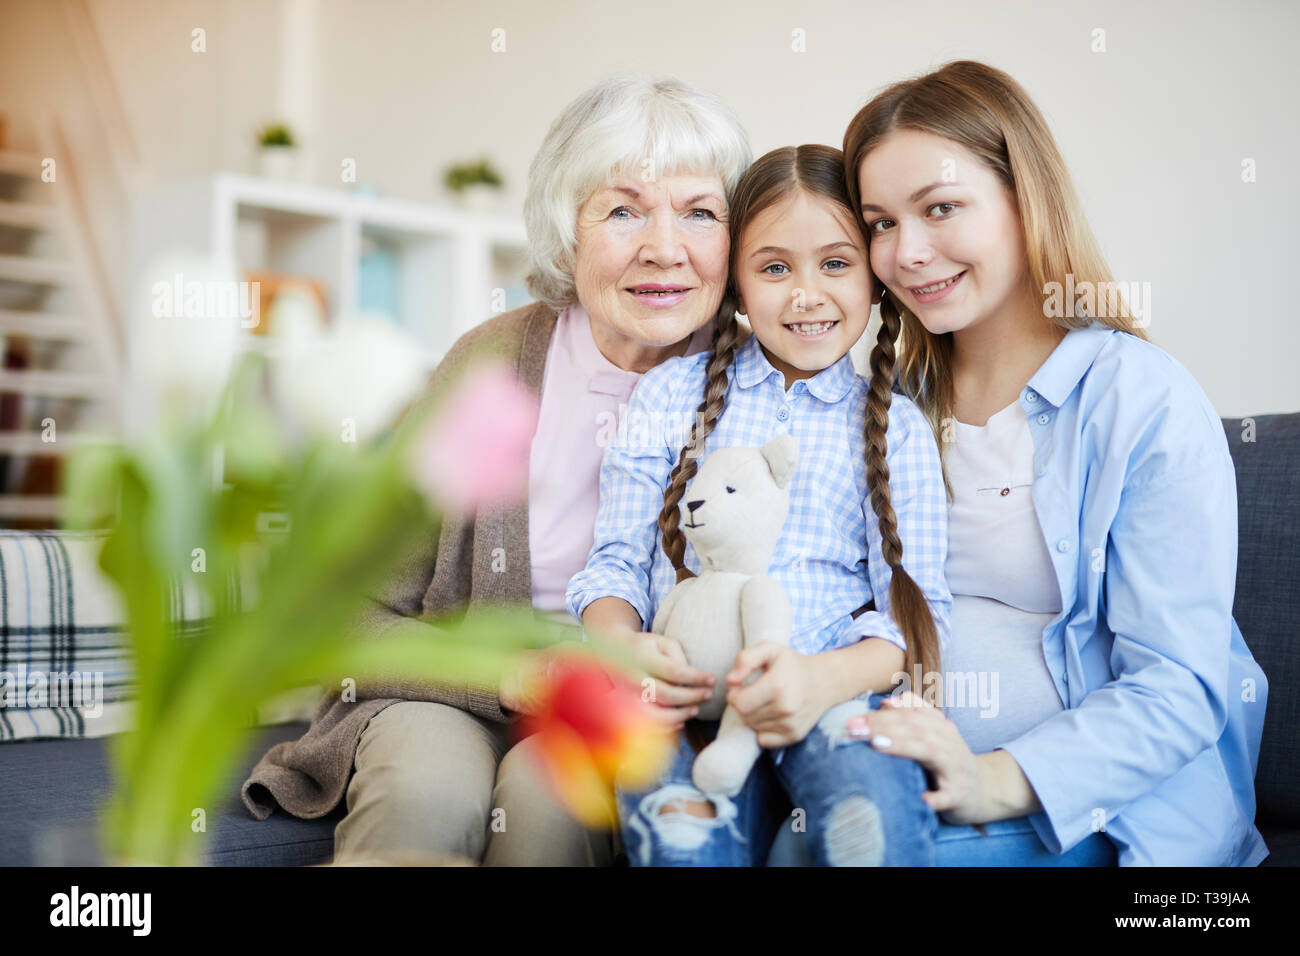 Beautiful Old Woman And Young Girl Are Hugging, Looking At Each Other And  Smiling While Sitting On Couch At Home Stock Photo, Picture and Royalty  Free Image. Image 63889002.